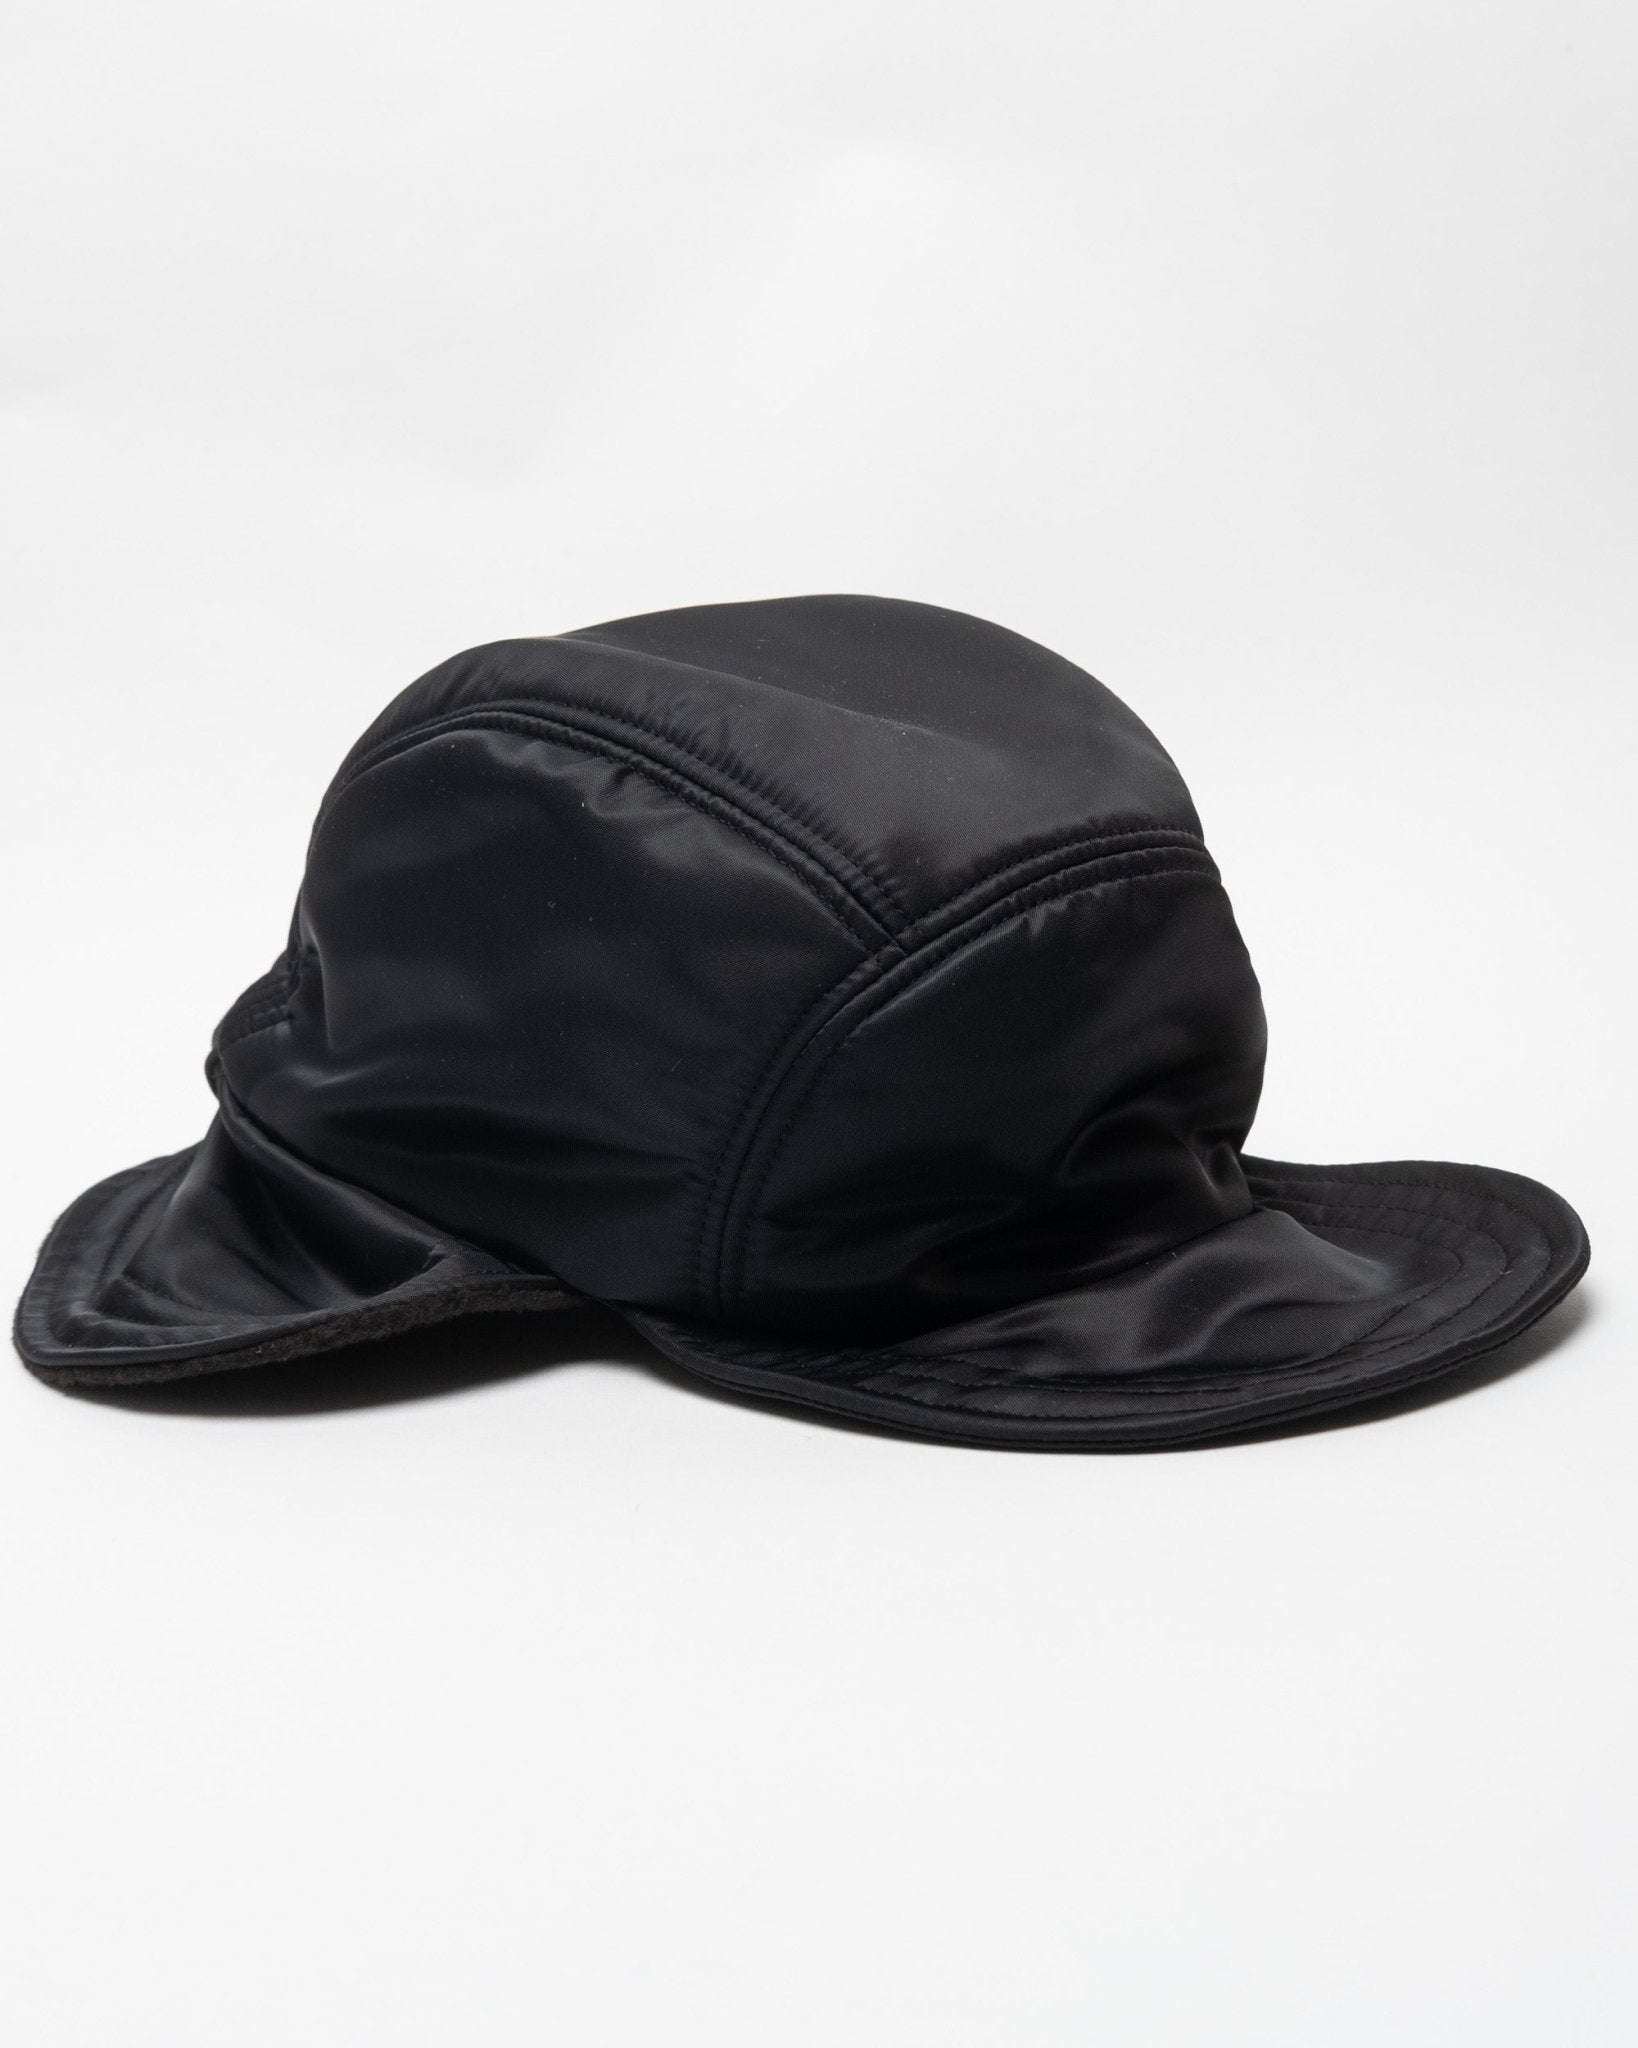 Lily Pad Hat Black - Meadow